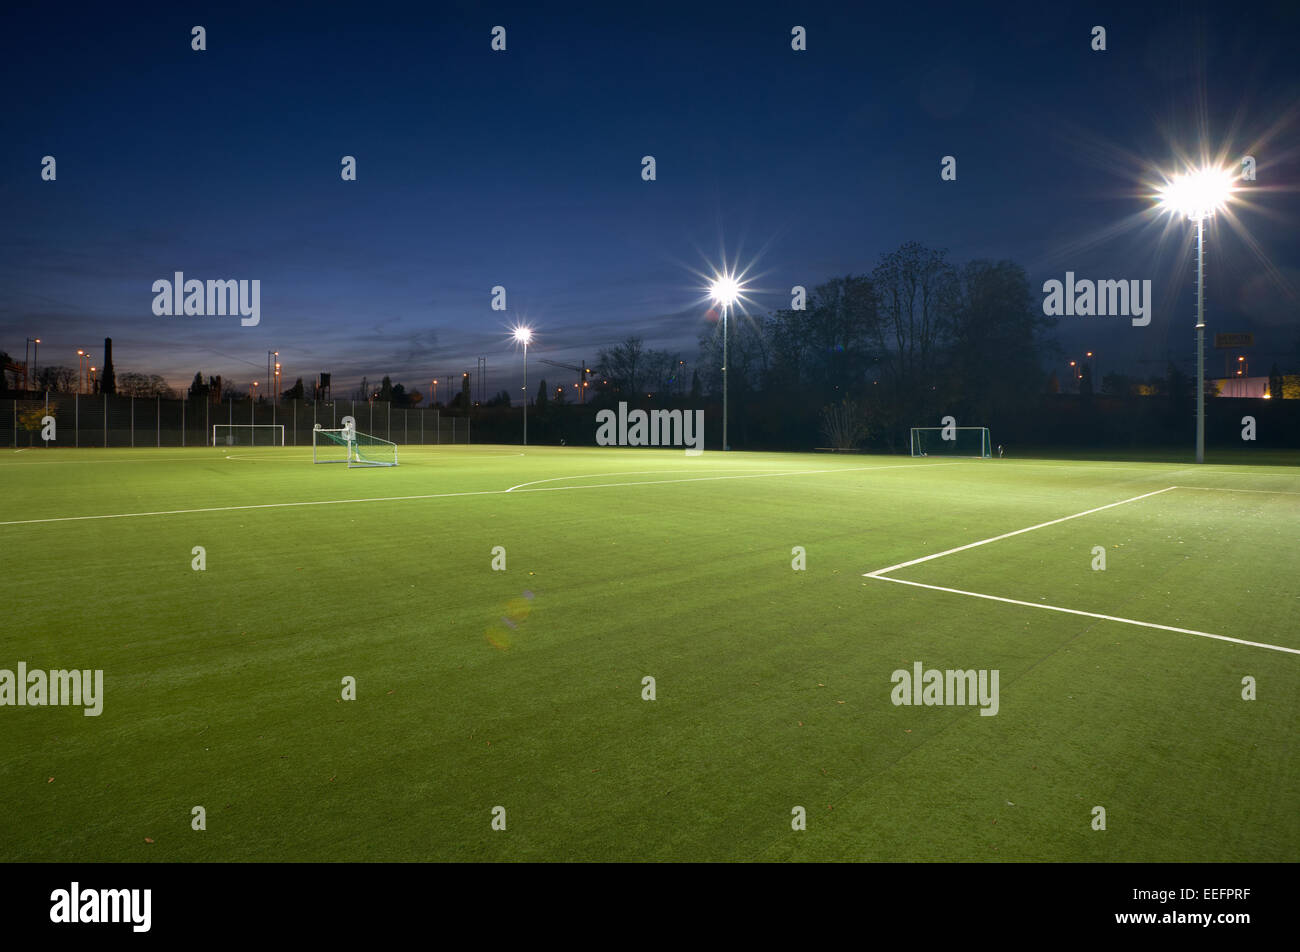 Berlin, Germany, football pitch with floodlights at night Stock Photo